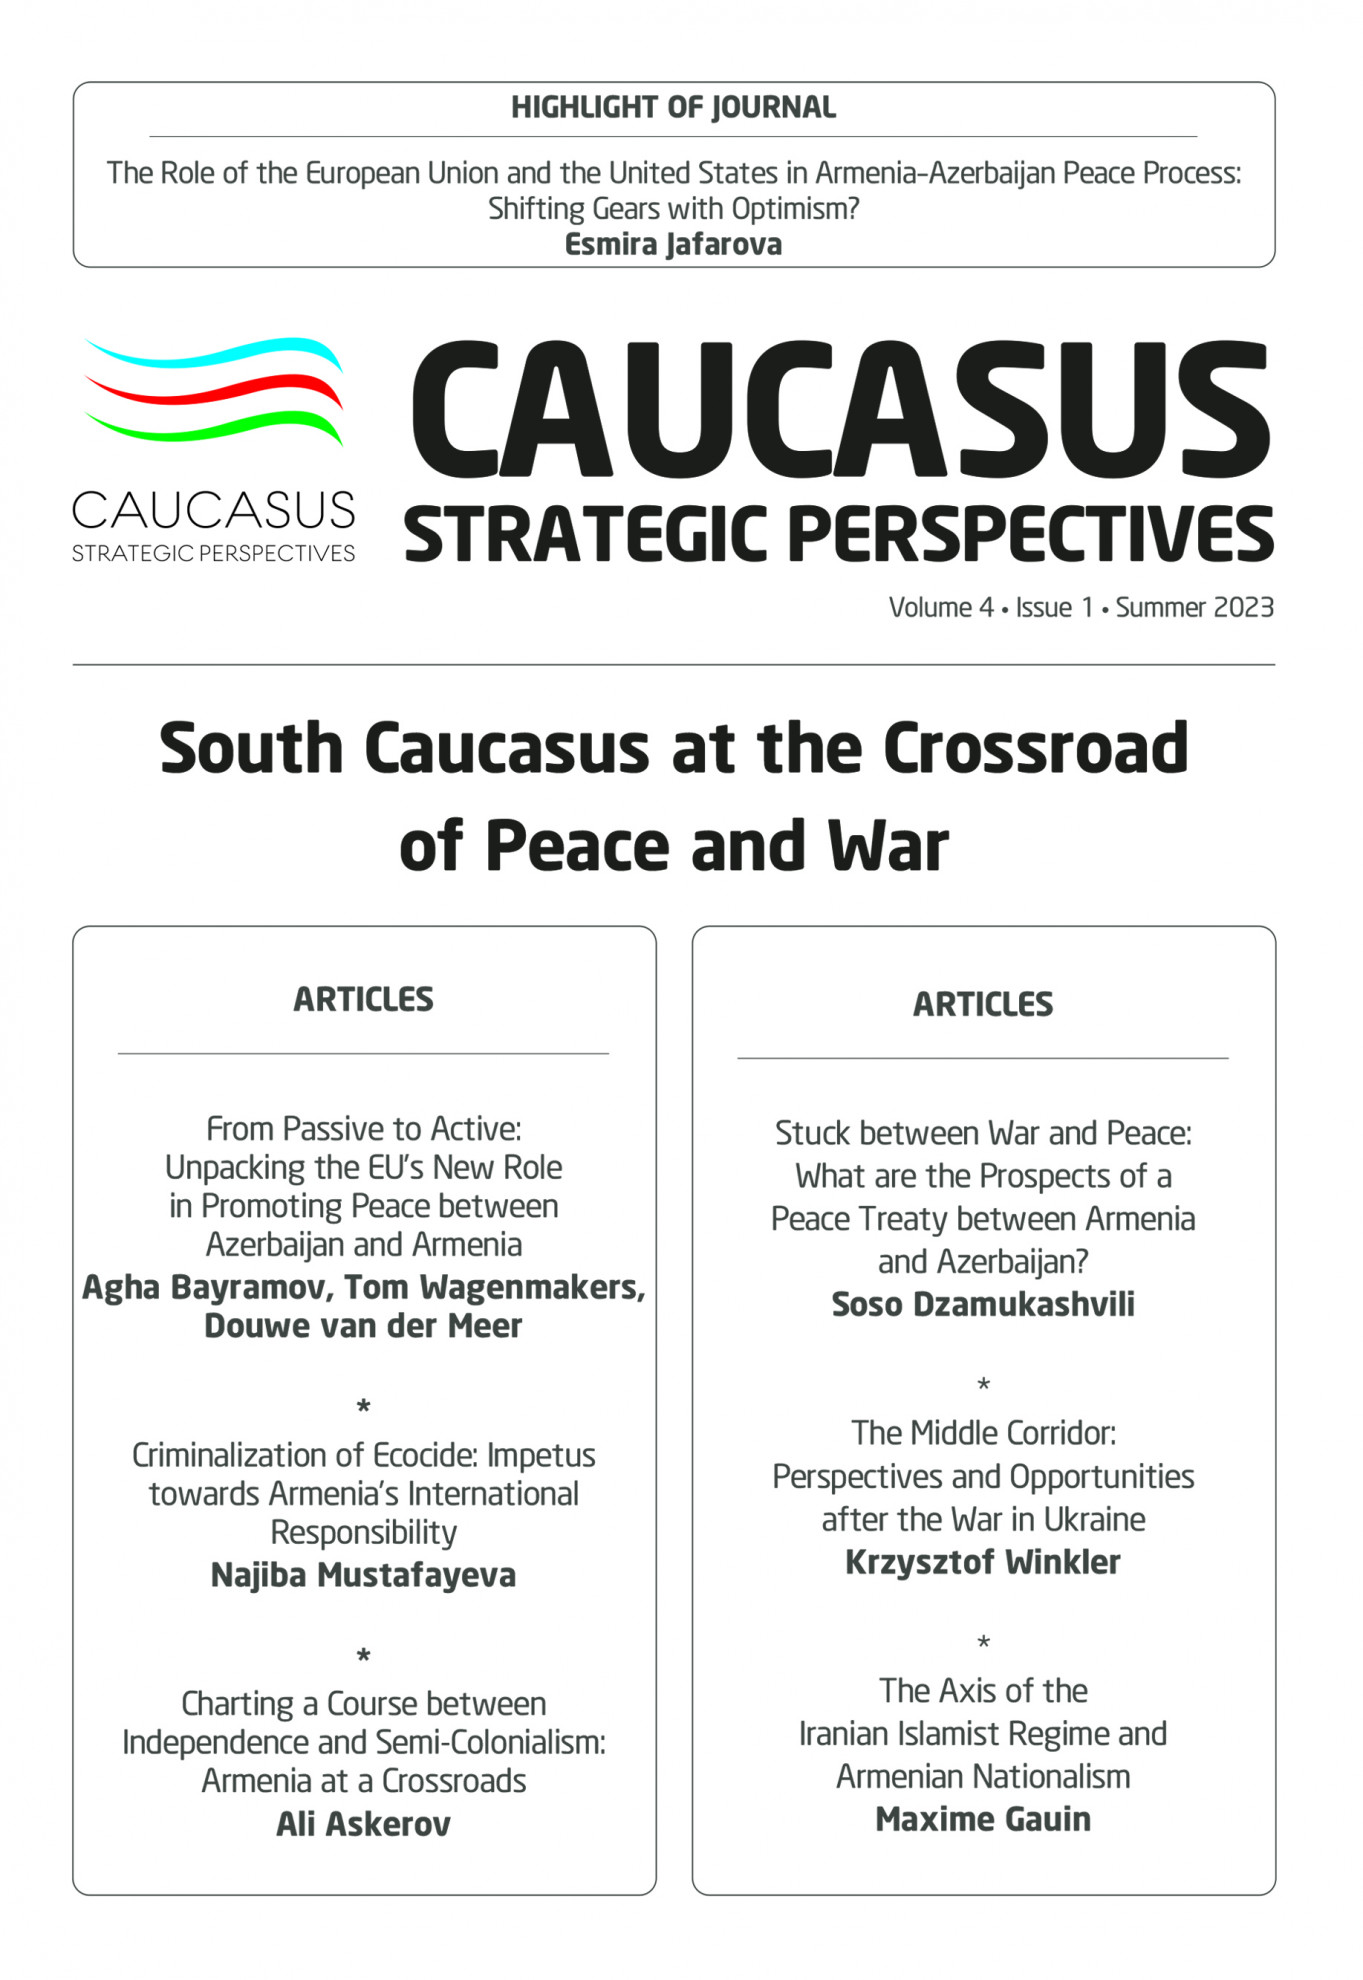 A new issue (Volume 4, Issue 1, Summer 2023) of the Journal of Caucasus Strategic Perspectives (CSP) has been released